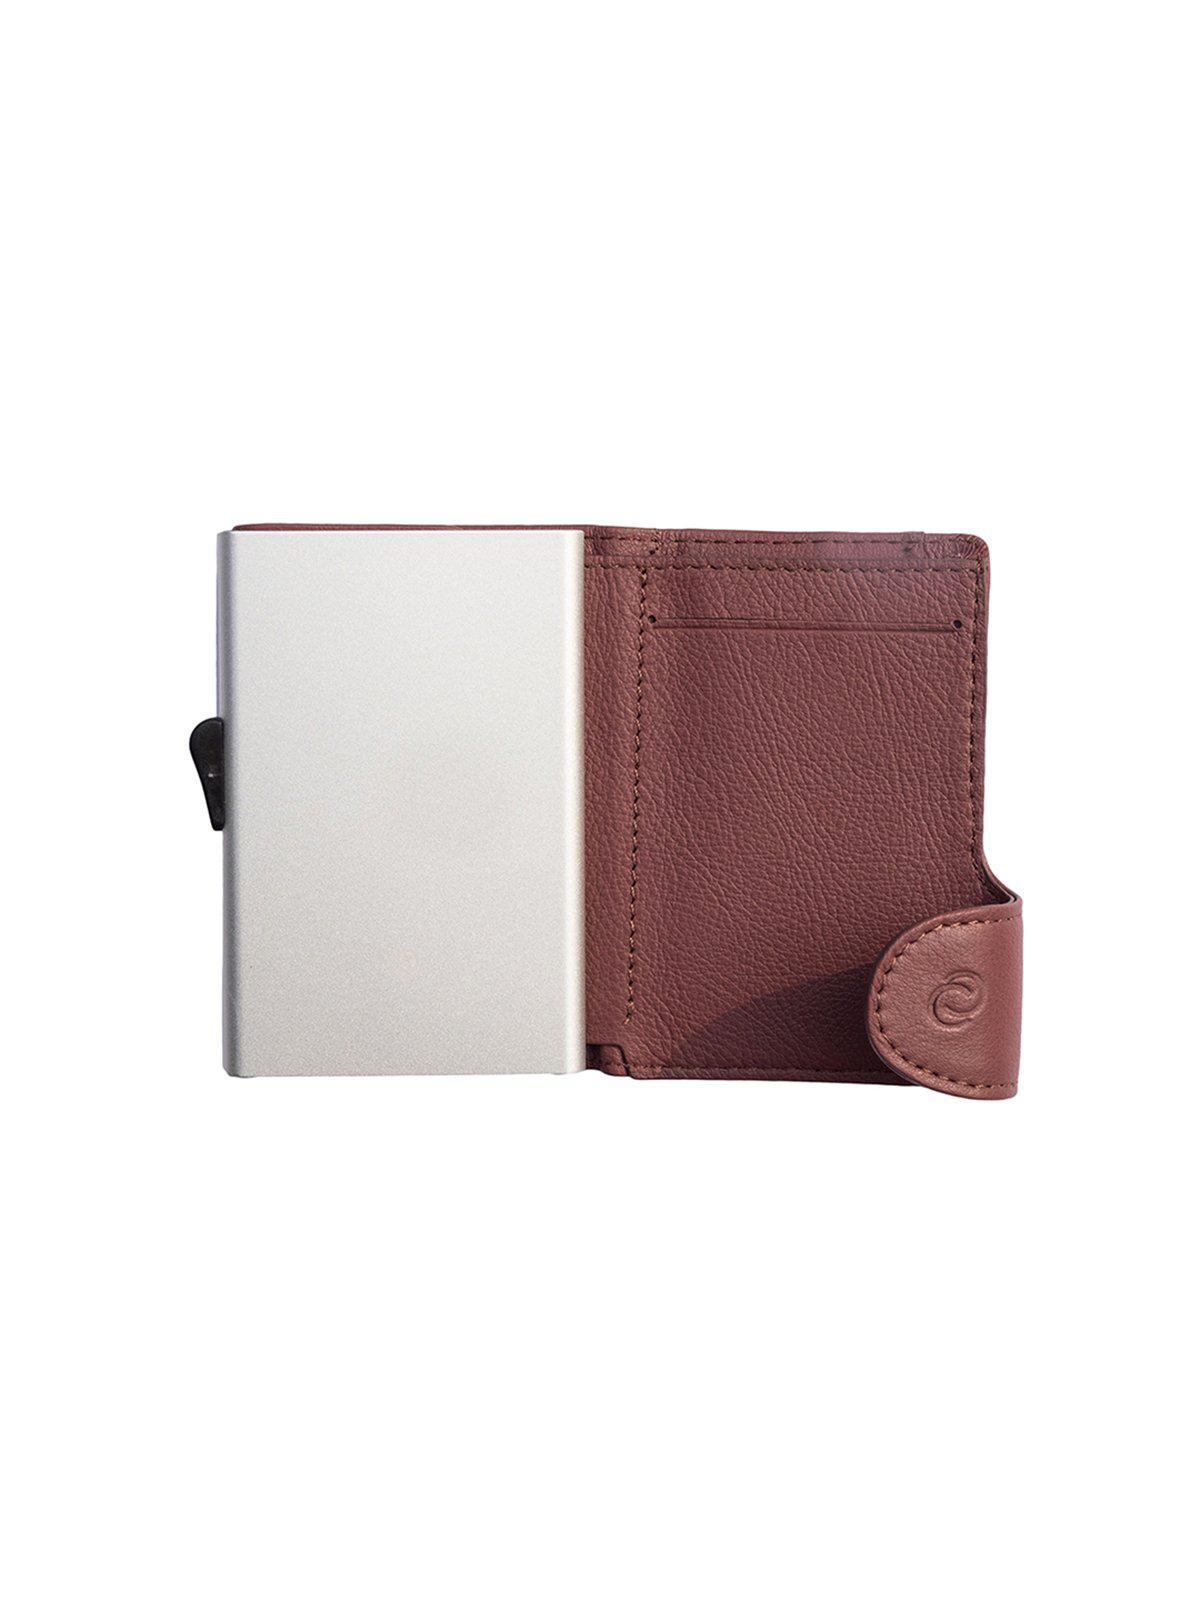 C-Secure Italian Leather RFID Wallet Bordo - MORE by Morello Indonesia